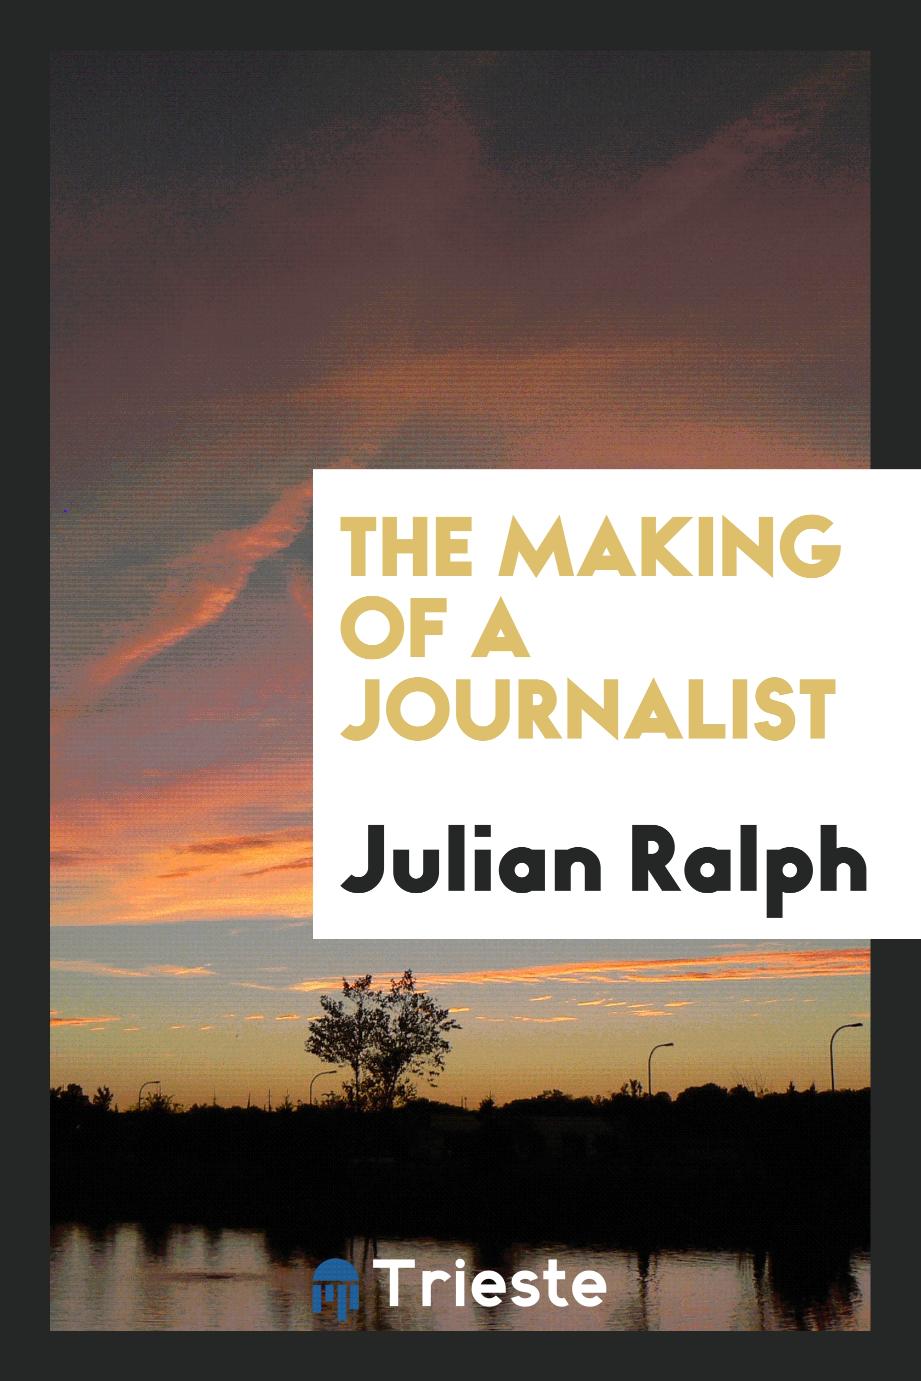 The making of a journalist